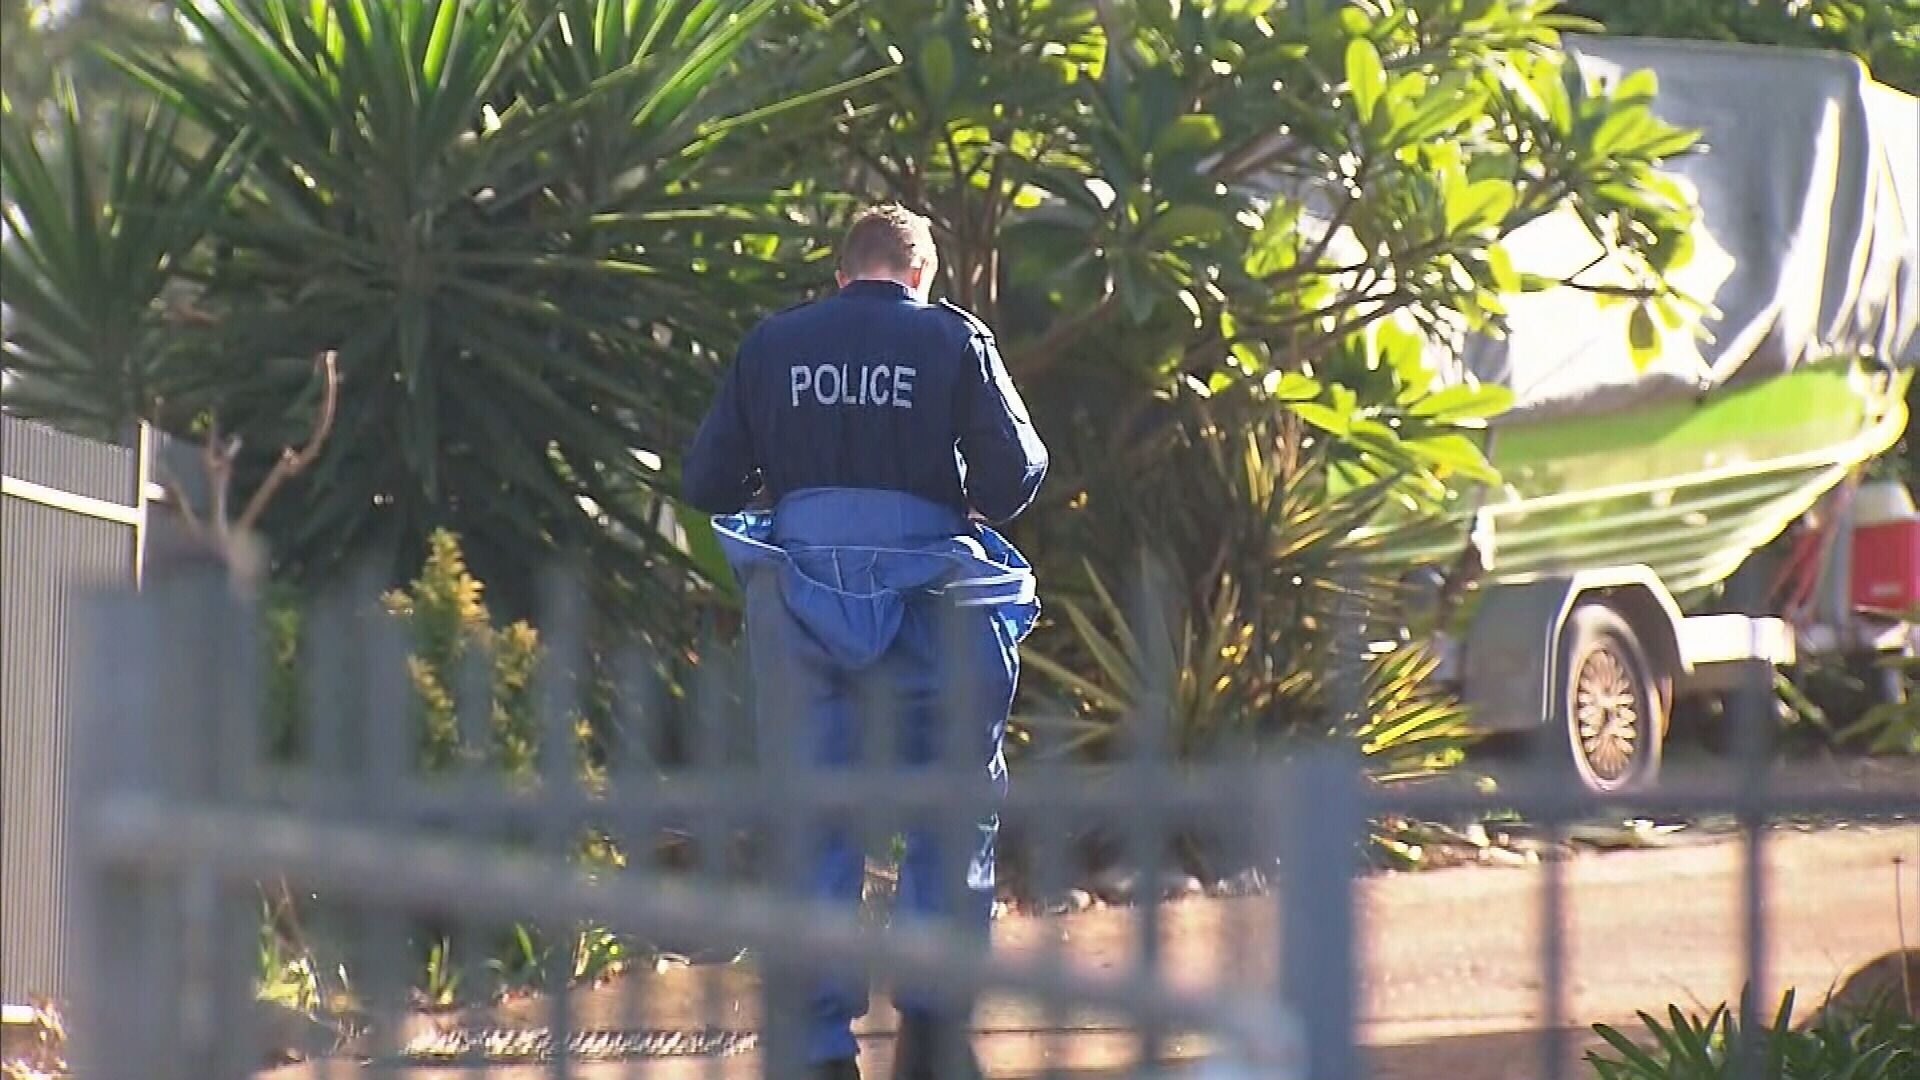 Police are at a house in Sydney's west after a woman's body was found.